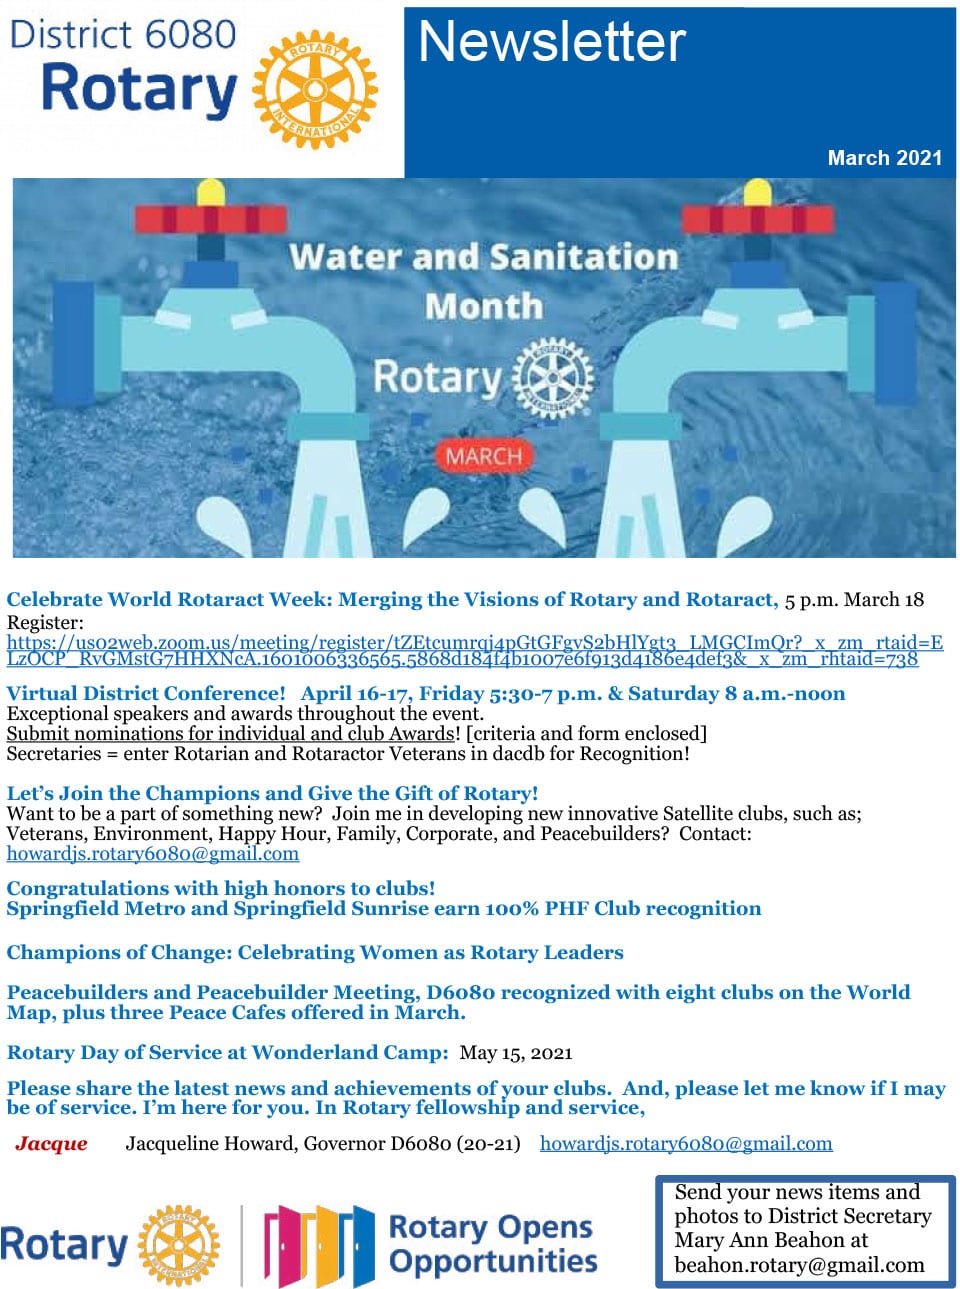 March 2021 District Governor Newsletter